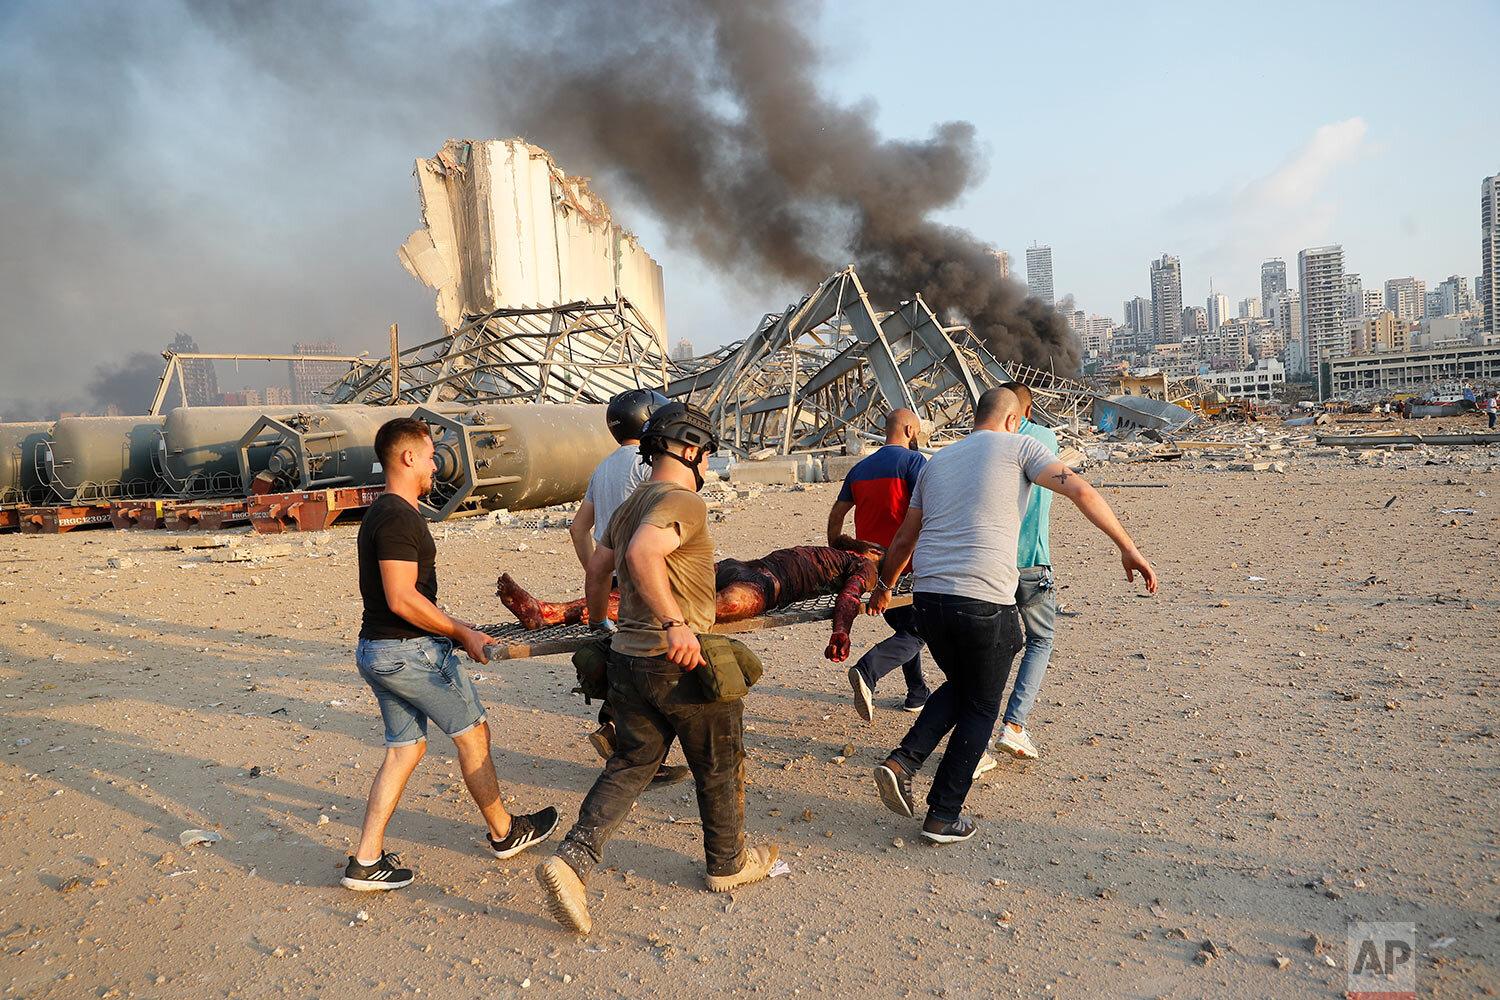  Civilians carry a person at the explosion scene that hit the seaport, in Beirut Lebanon, Tuesday, Aug. 4, 2020. (AP Photo/Hussein Malla) 